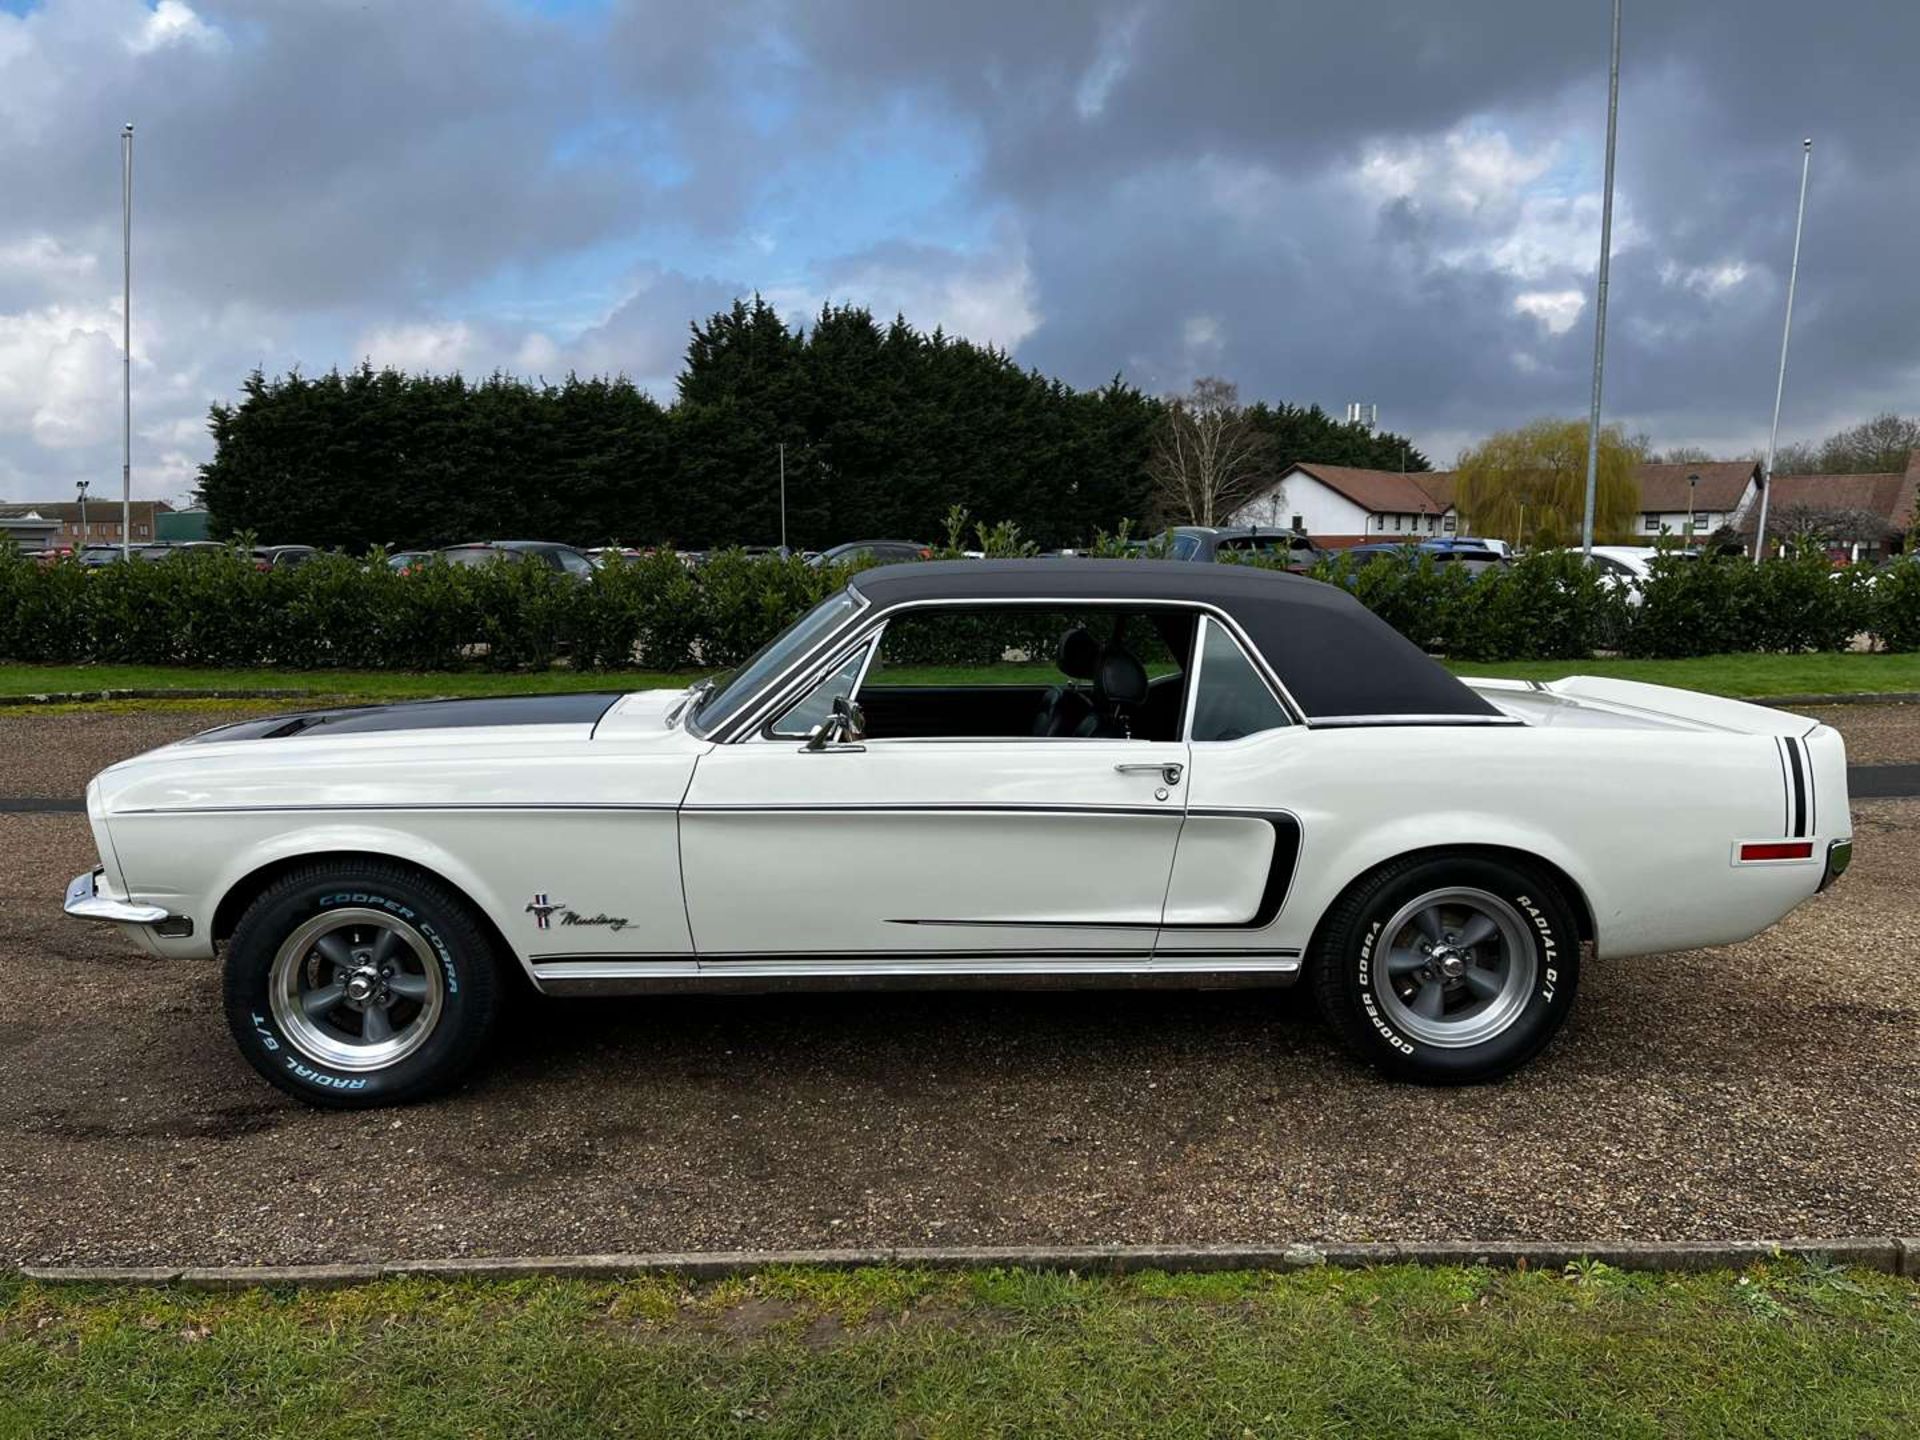 1968 FORD MUSTANG 5.0 V8 AUTO COUPE LHD - Image 4 of 29